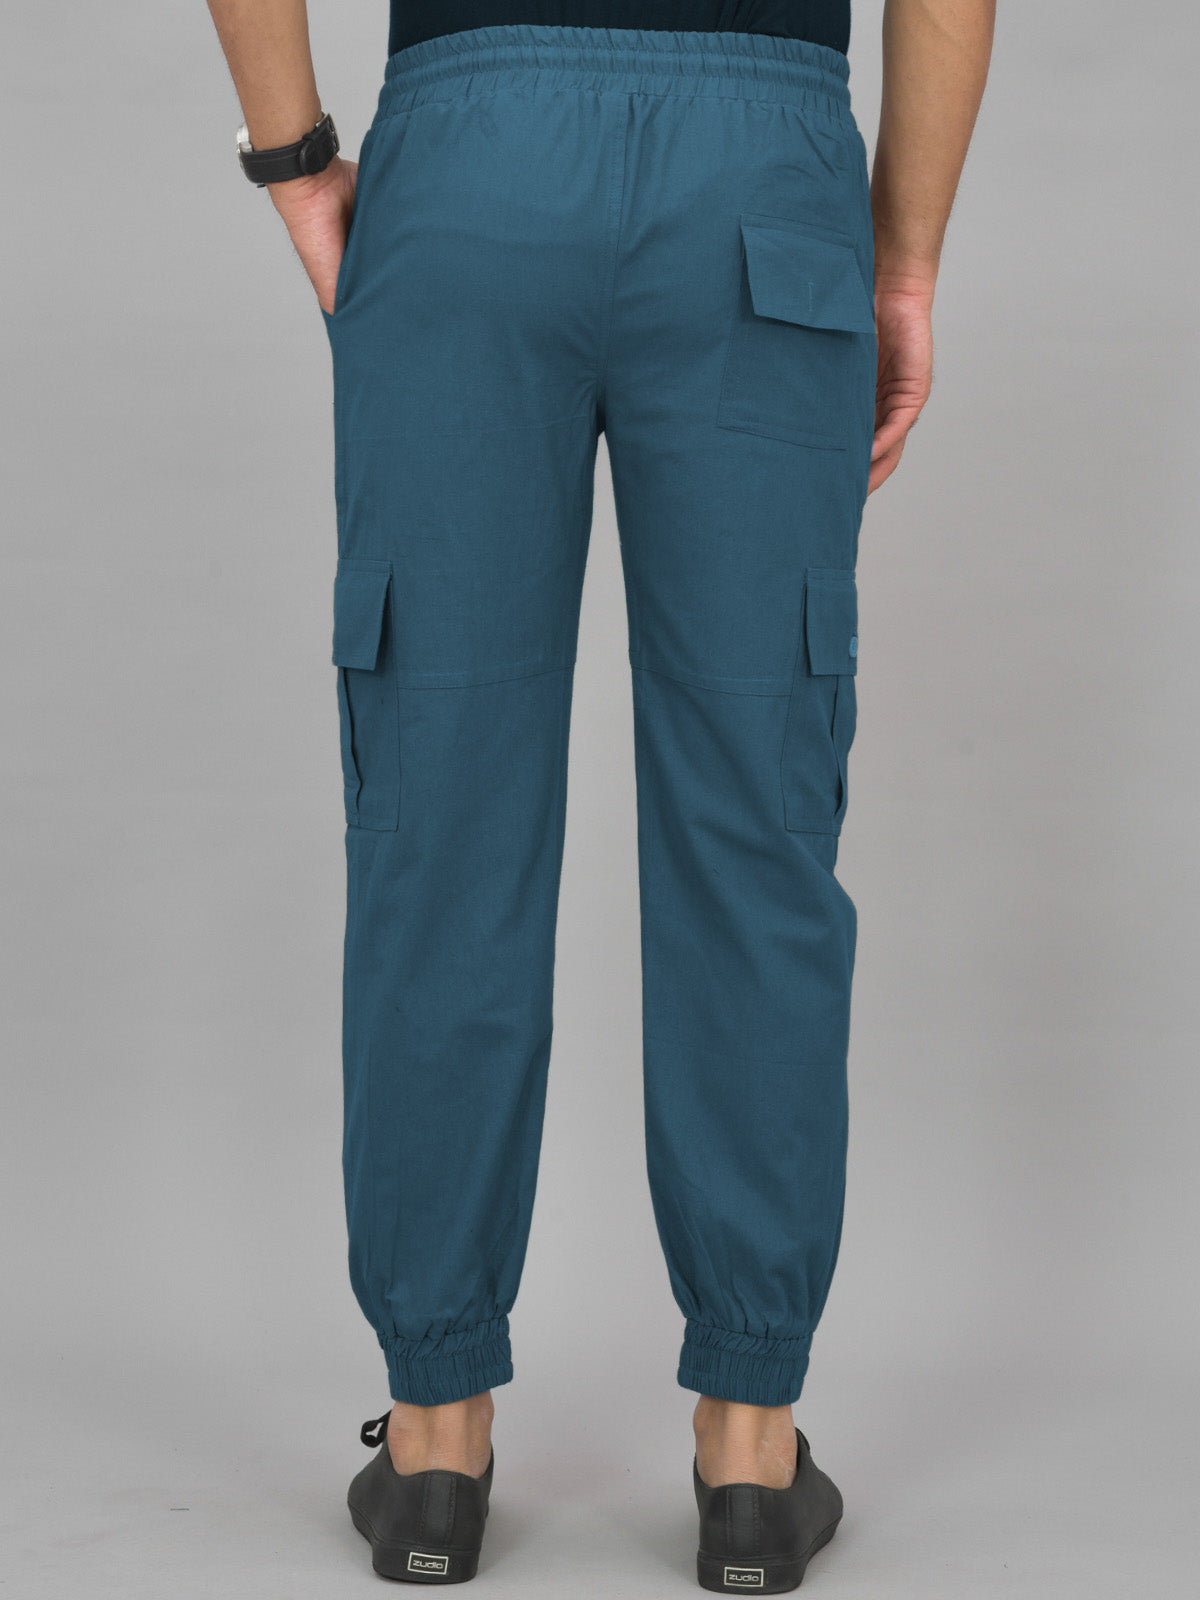 Pack Of 2 Mens Teal Blue And Grey Airy Linen Summer Cool Cotton Comfort Joggers